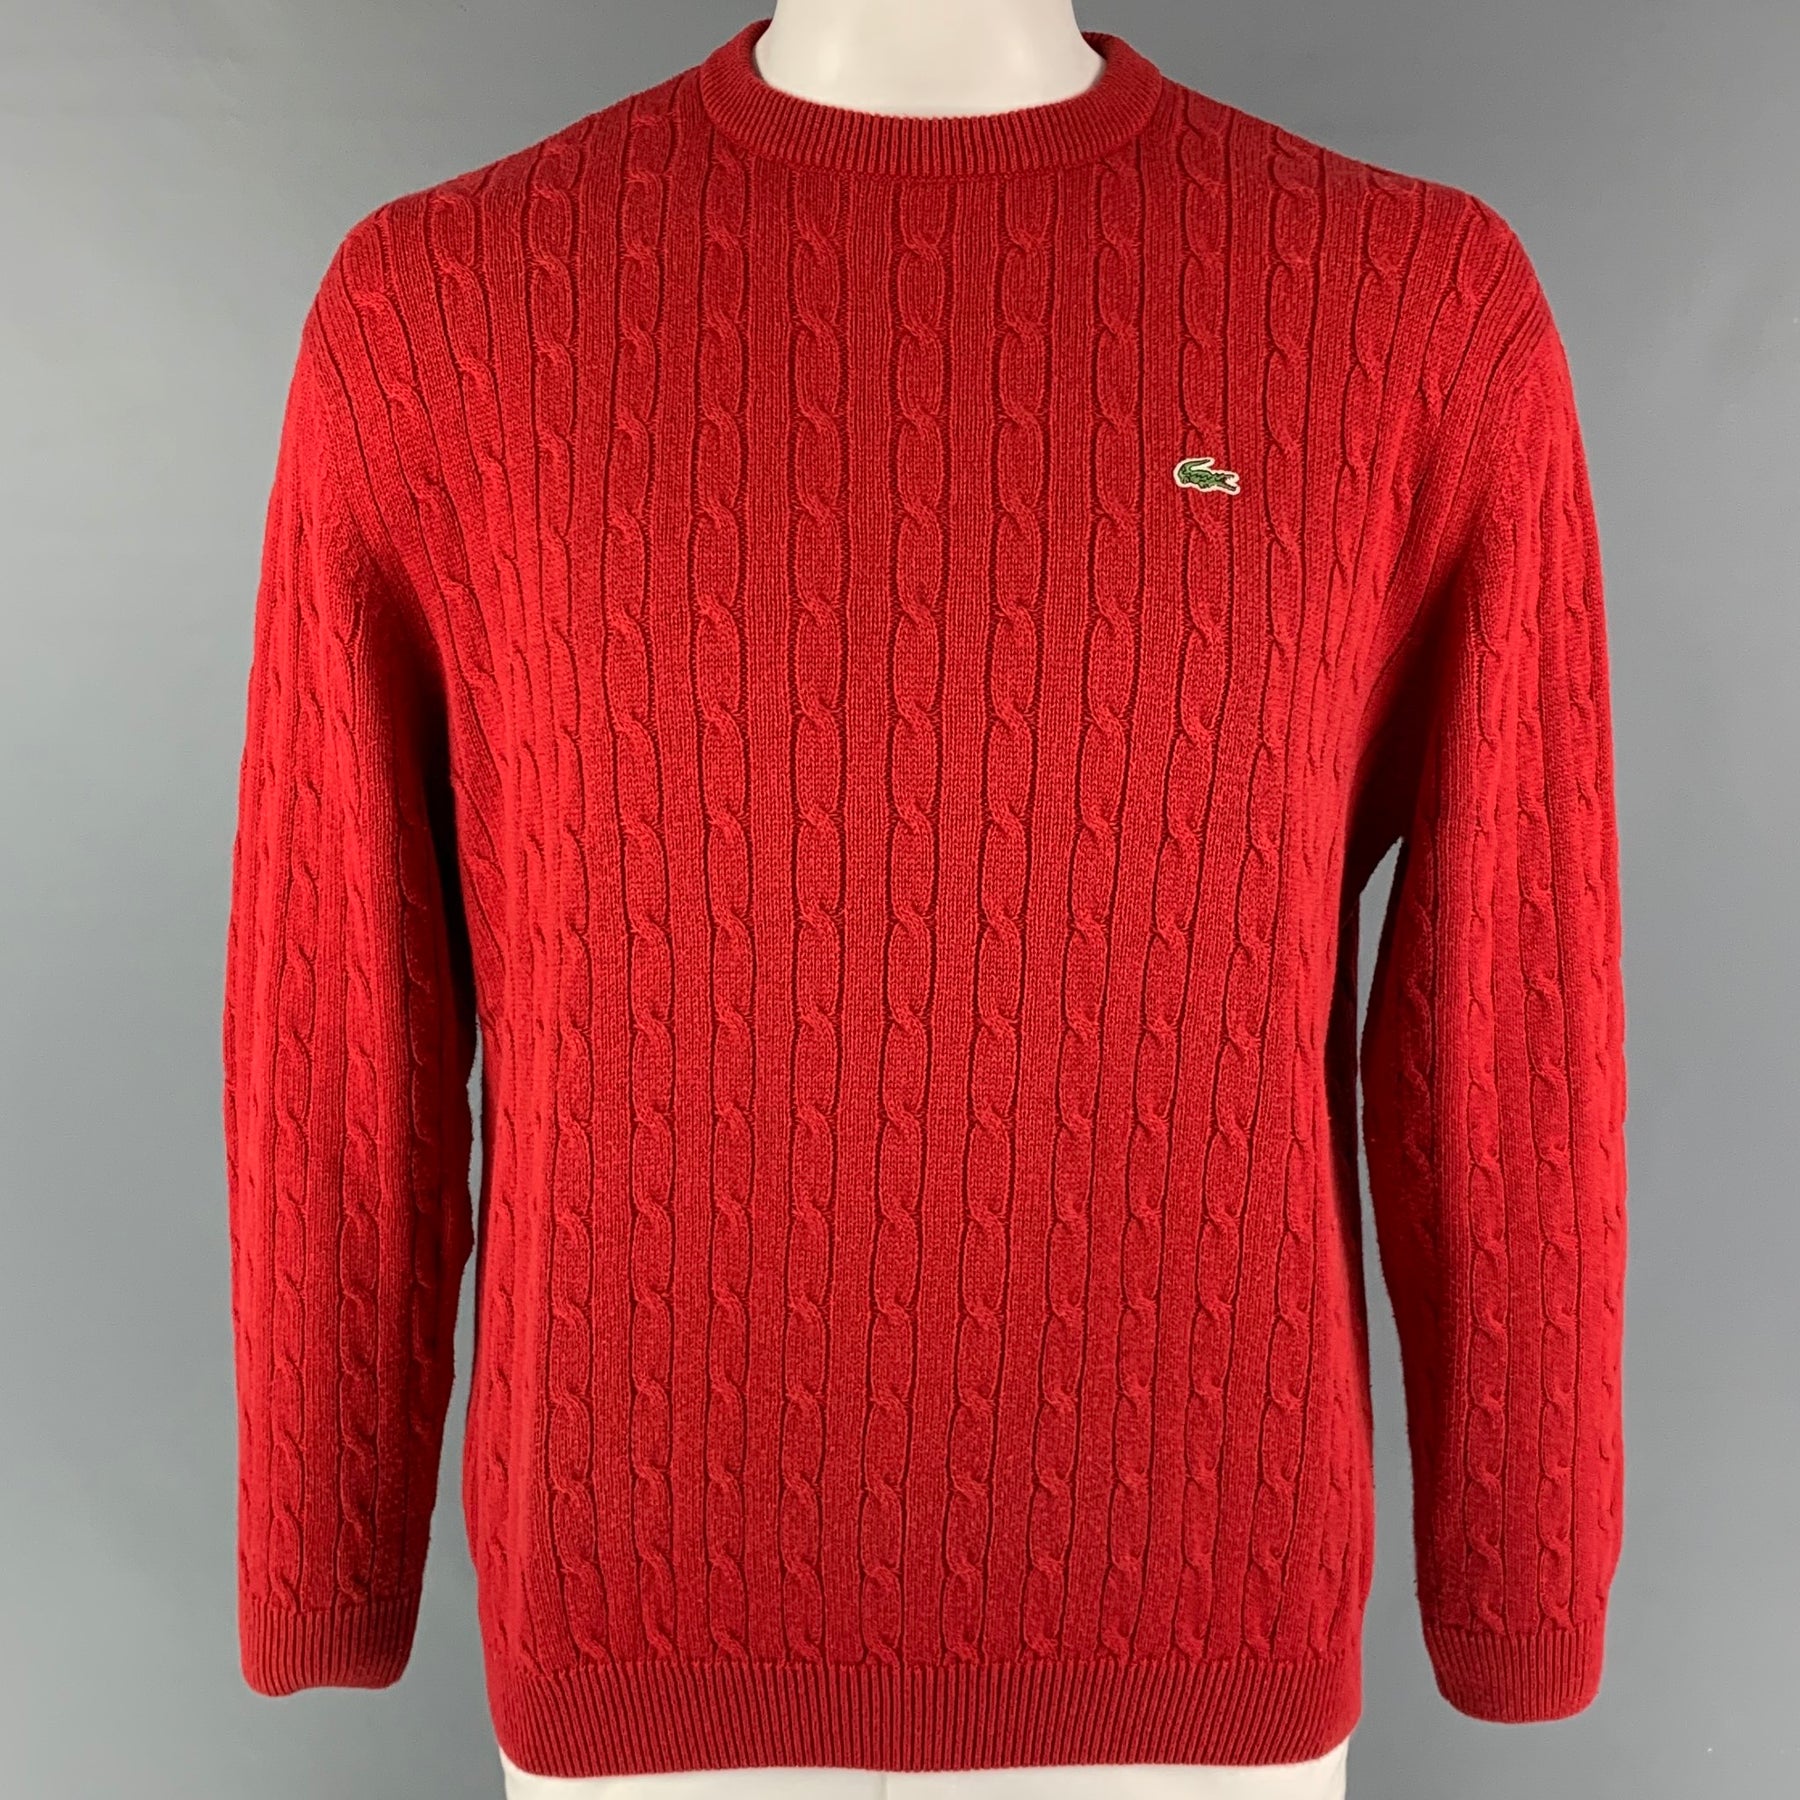 Consignment LACOSTE Knit Red Designer – Cotton Wool Generis Sweater XL Sui Size Crew-Neck Cable